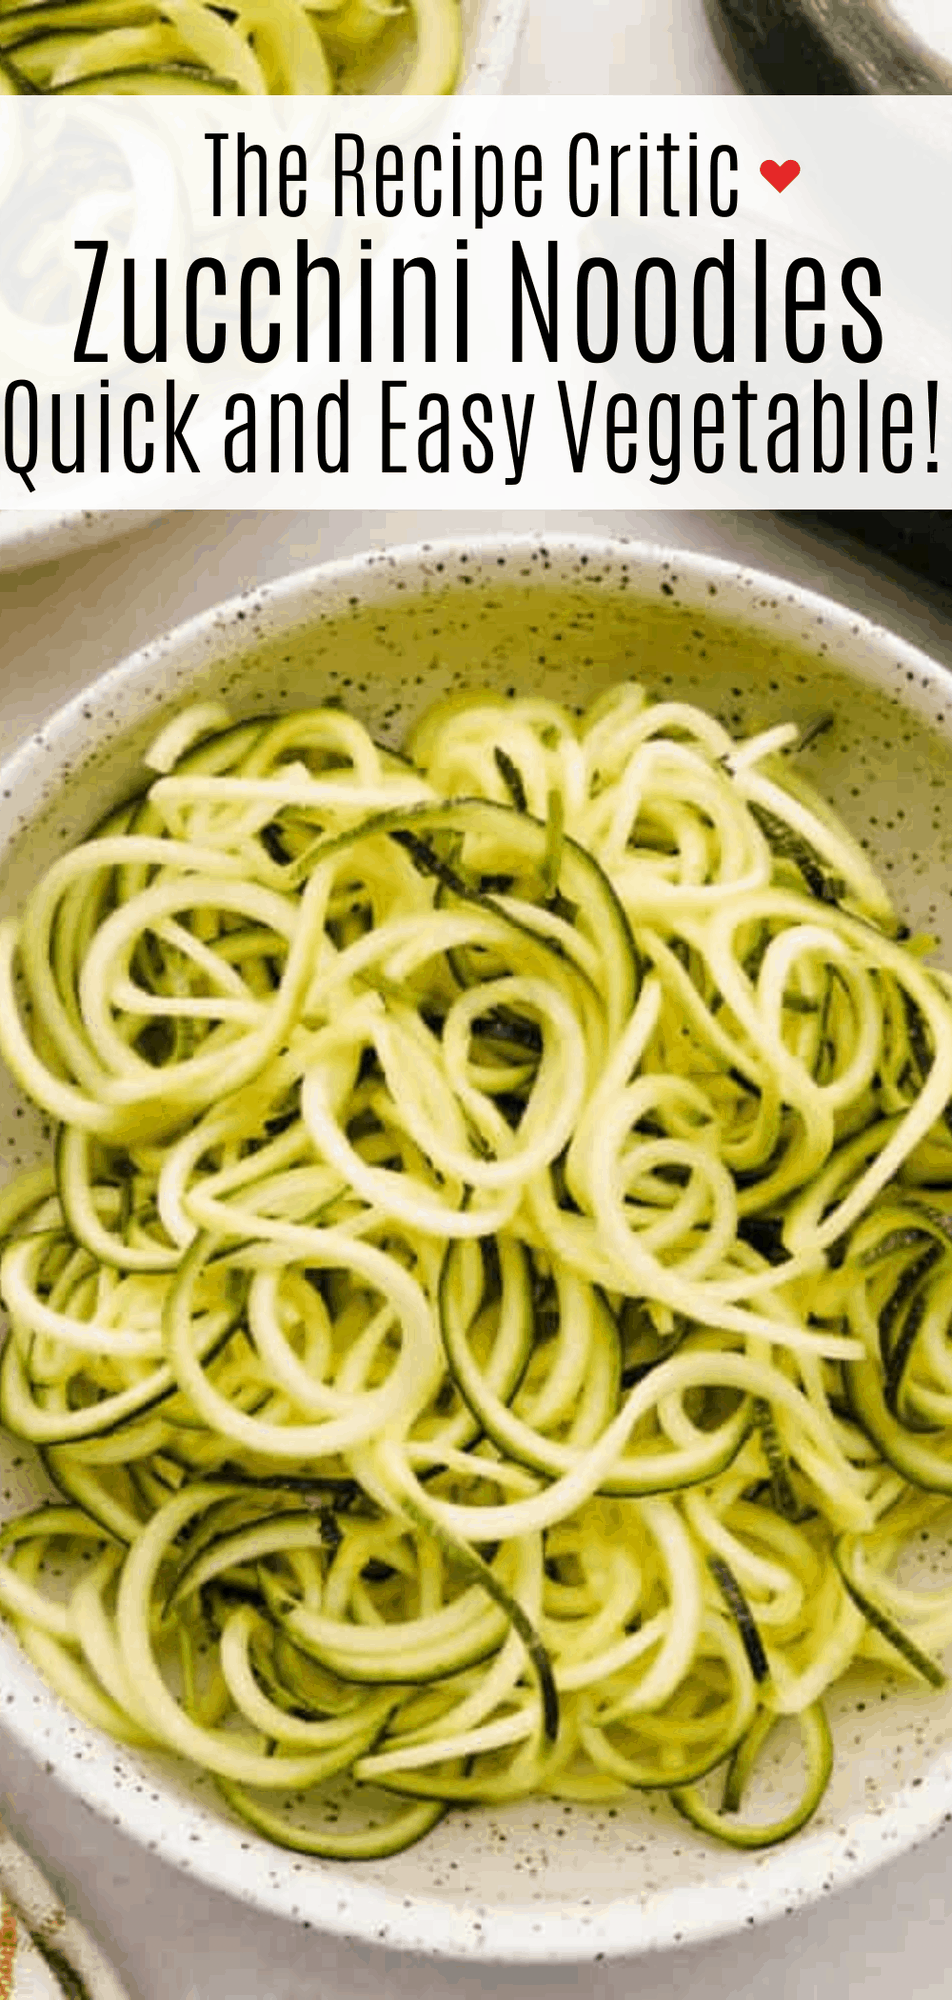 Zoodles: How to Cook and Avoid Watery, Soggy Zucchini Noodles - Real Simple  Good